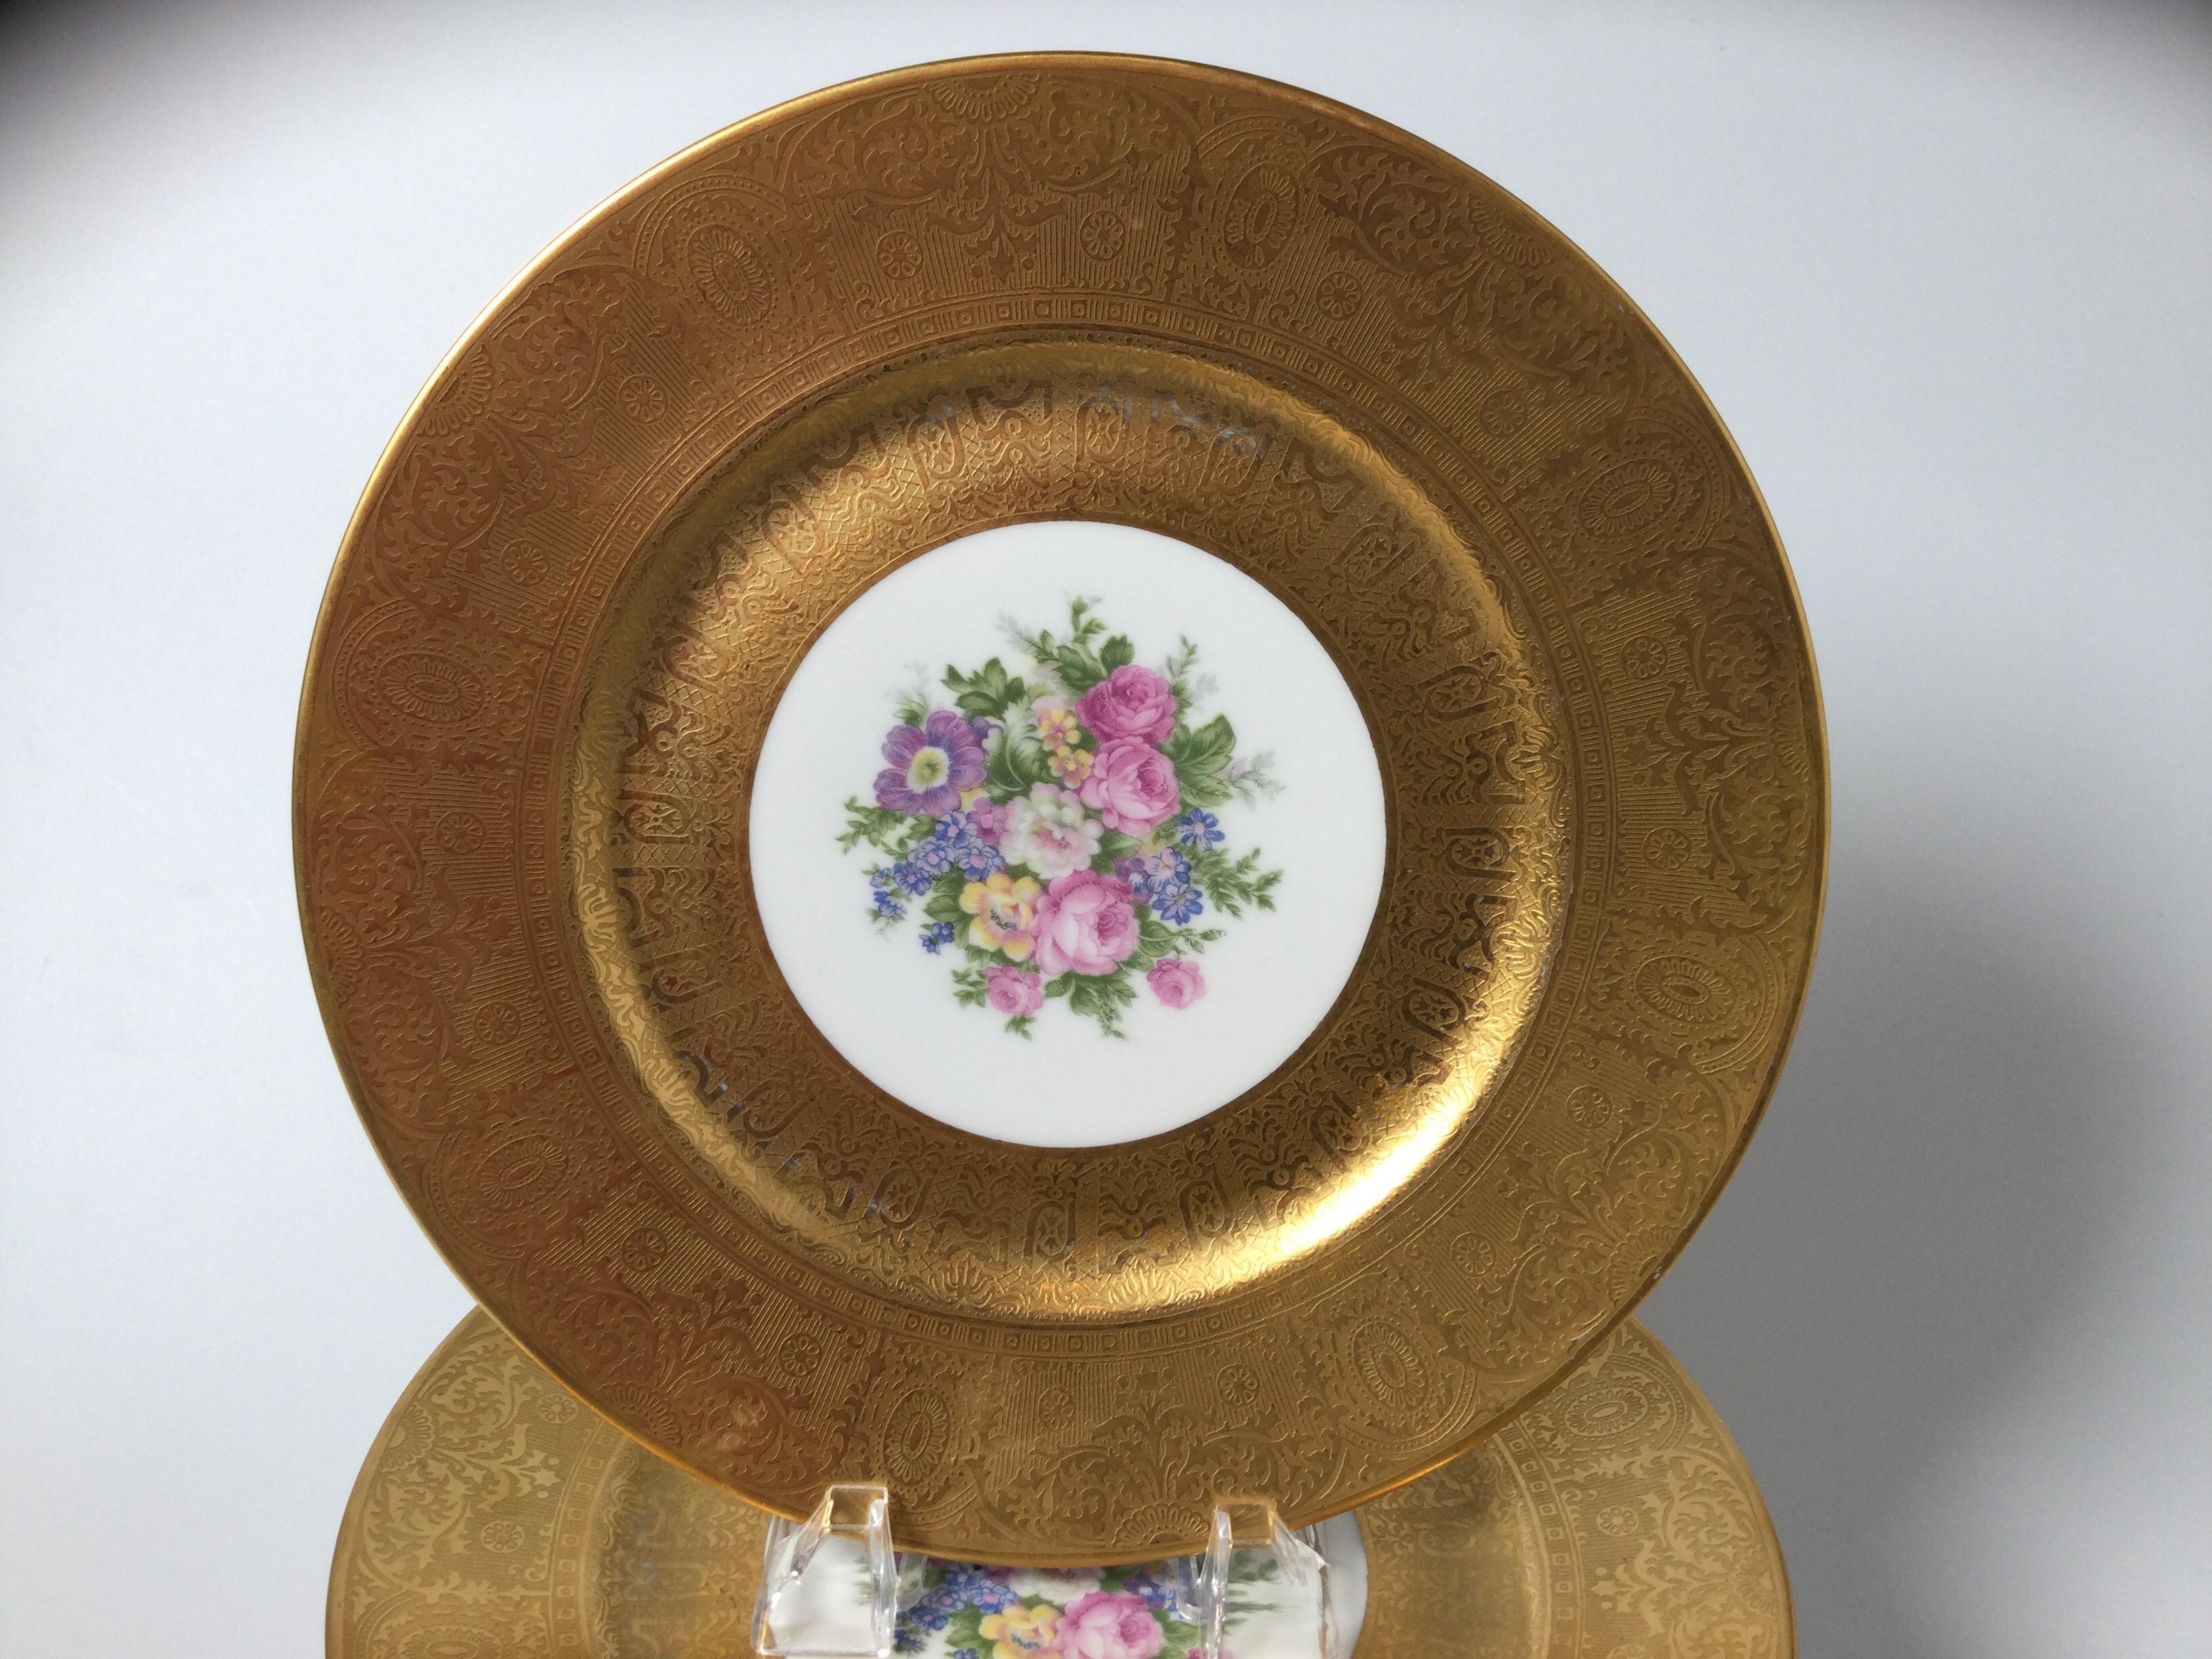 A set of 12 heavy gold banded floral service cabinet plates by Limoges, The detailed gold border with a delicate bouquet of flowers in the center cartouche. 10.5 inches in diameter.